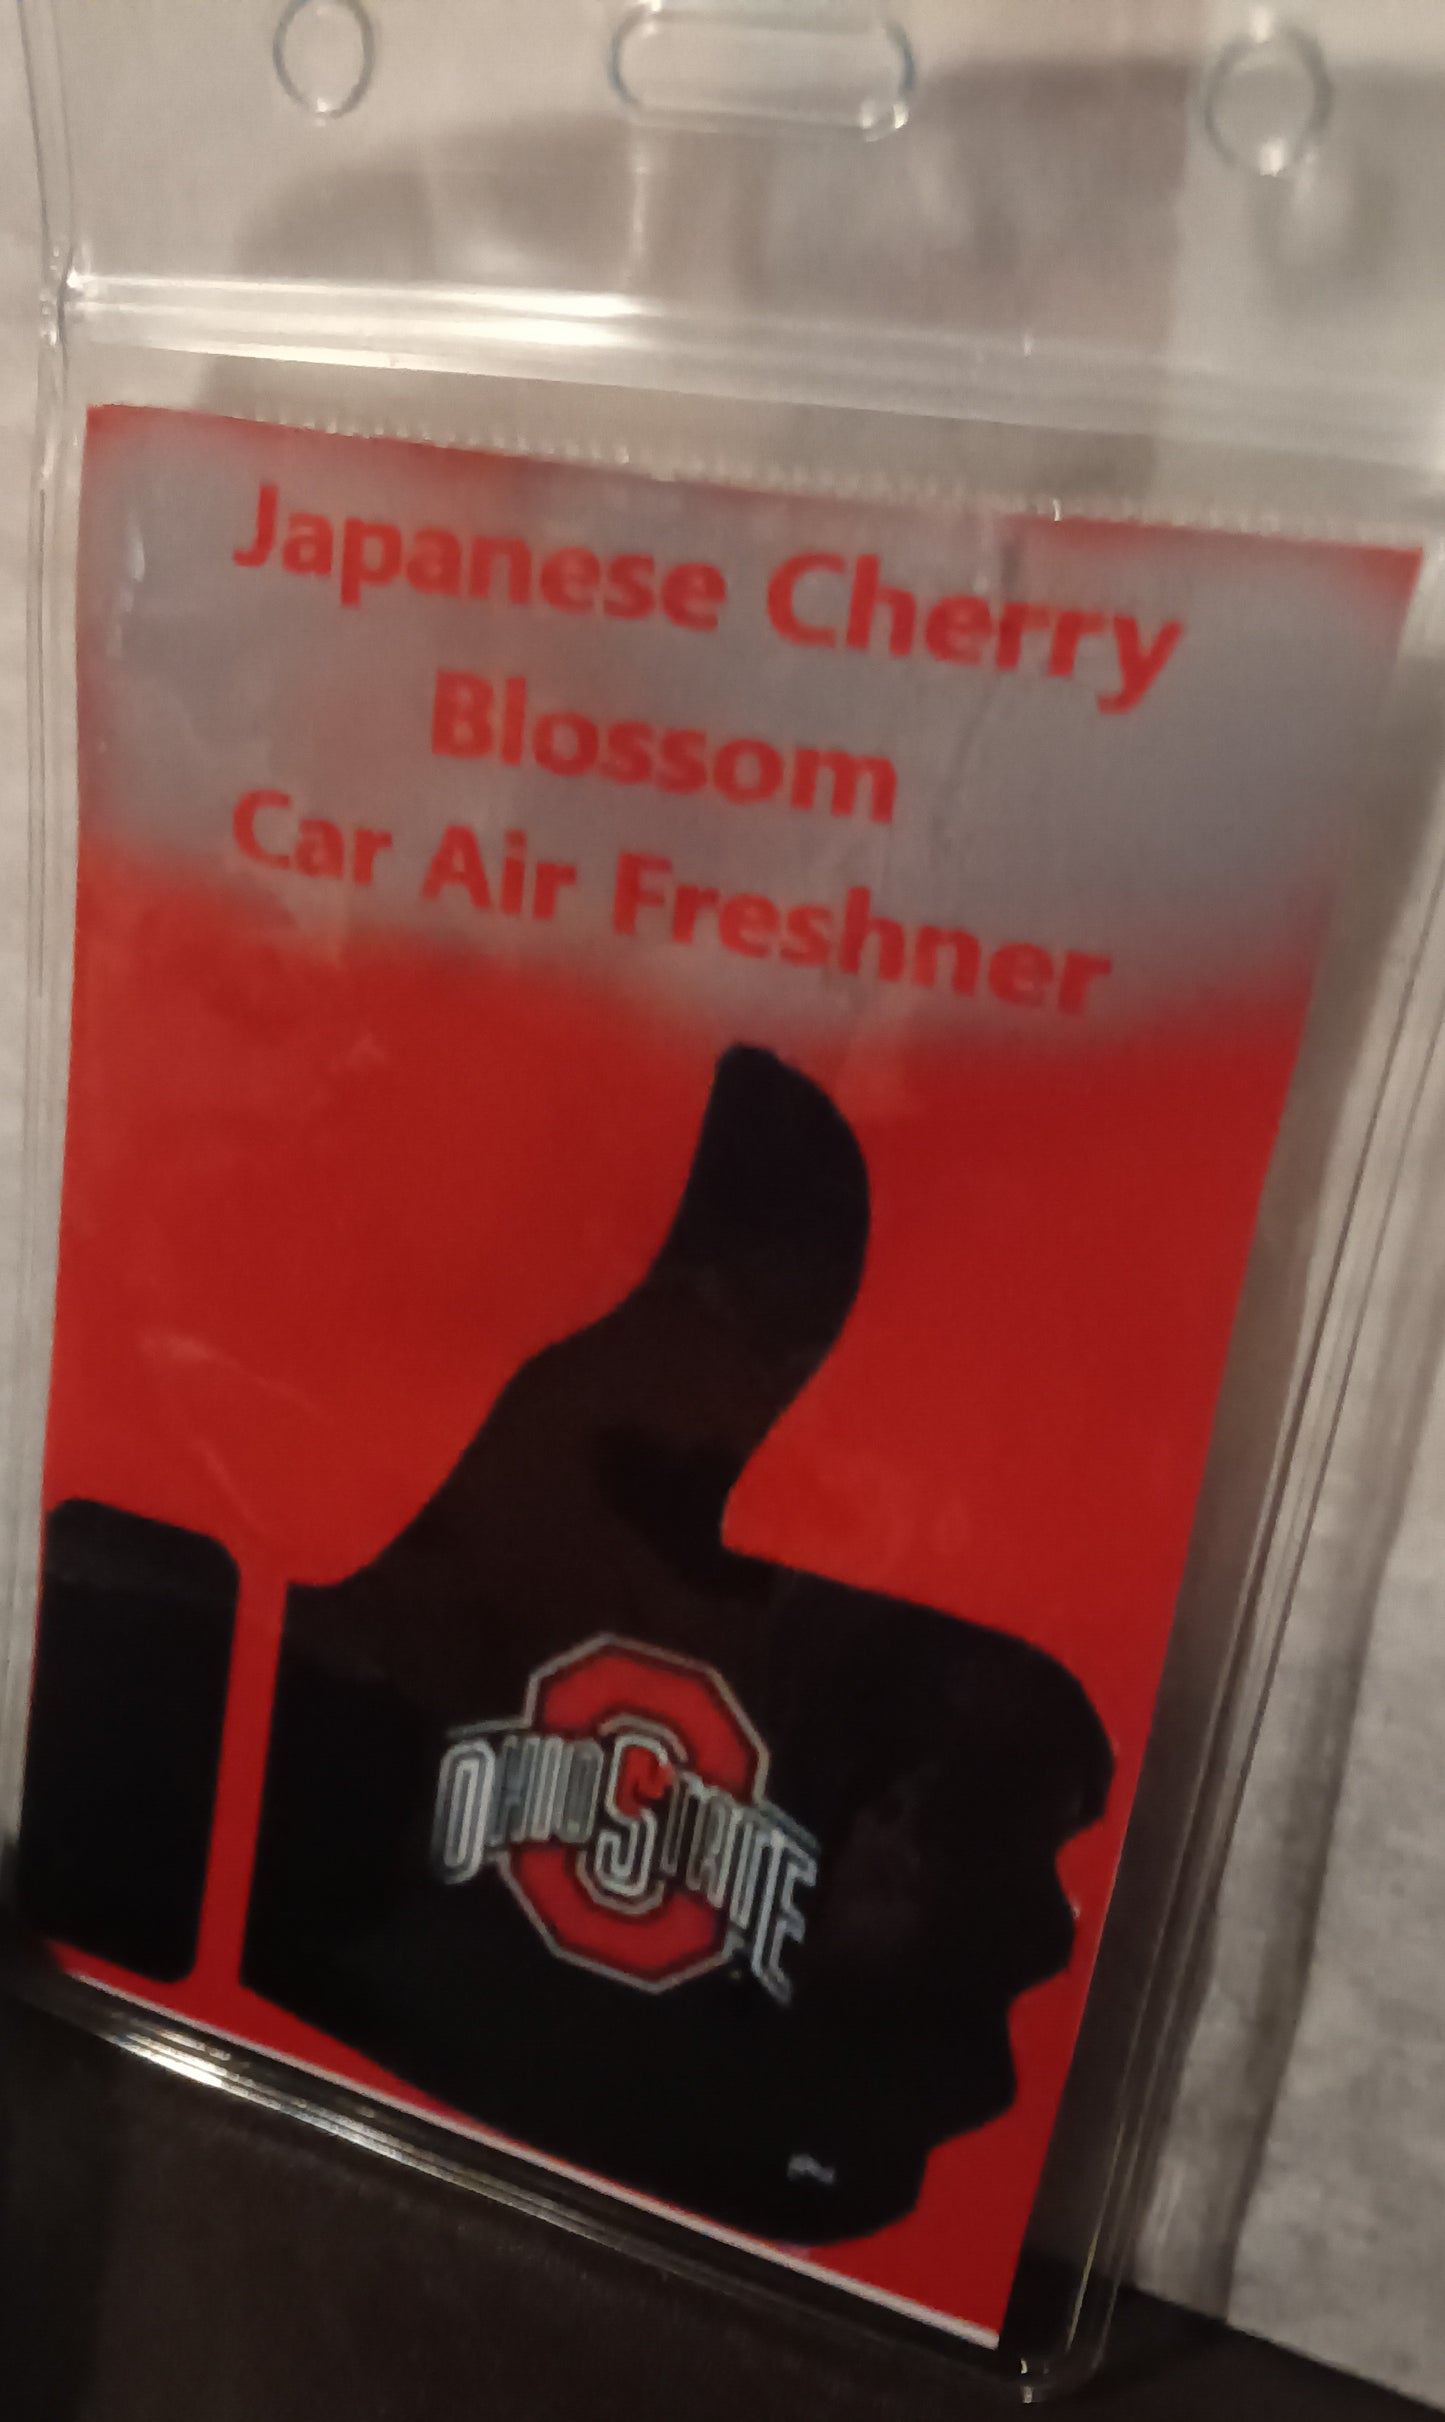 Thumbs Up for Ohio State Car Air Freshener